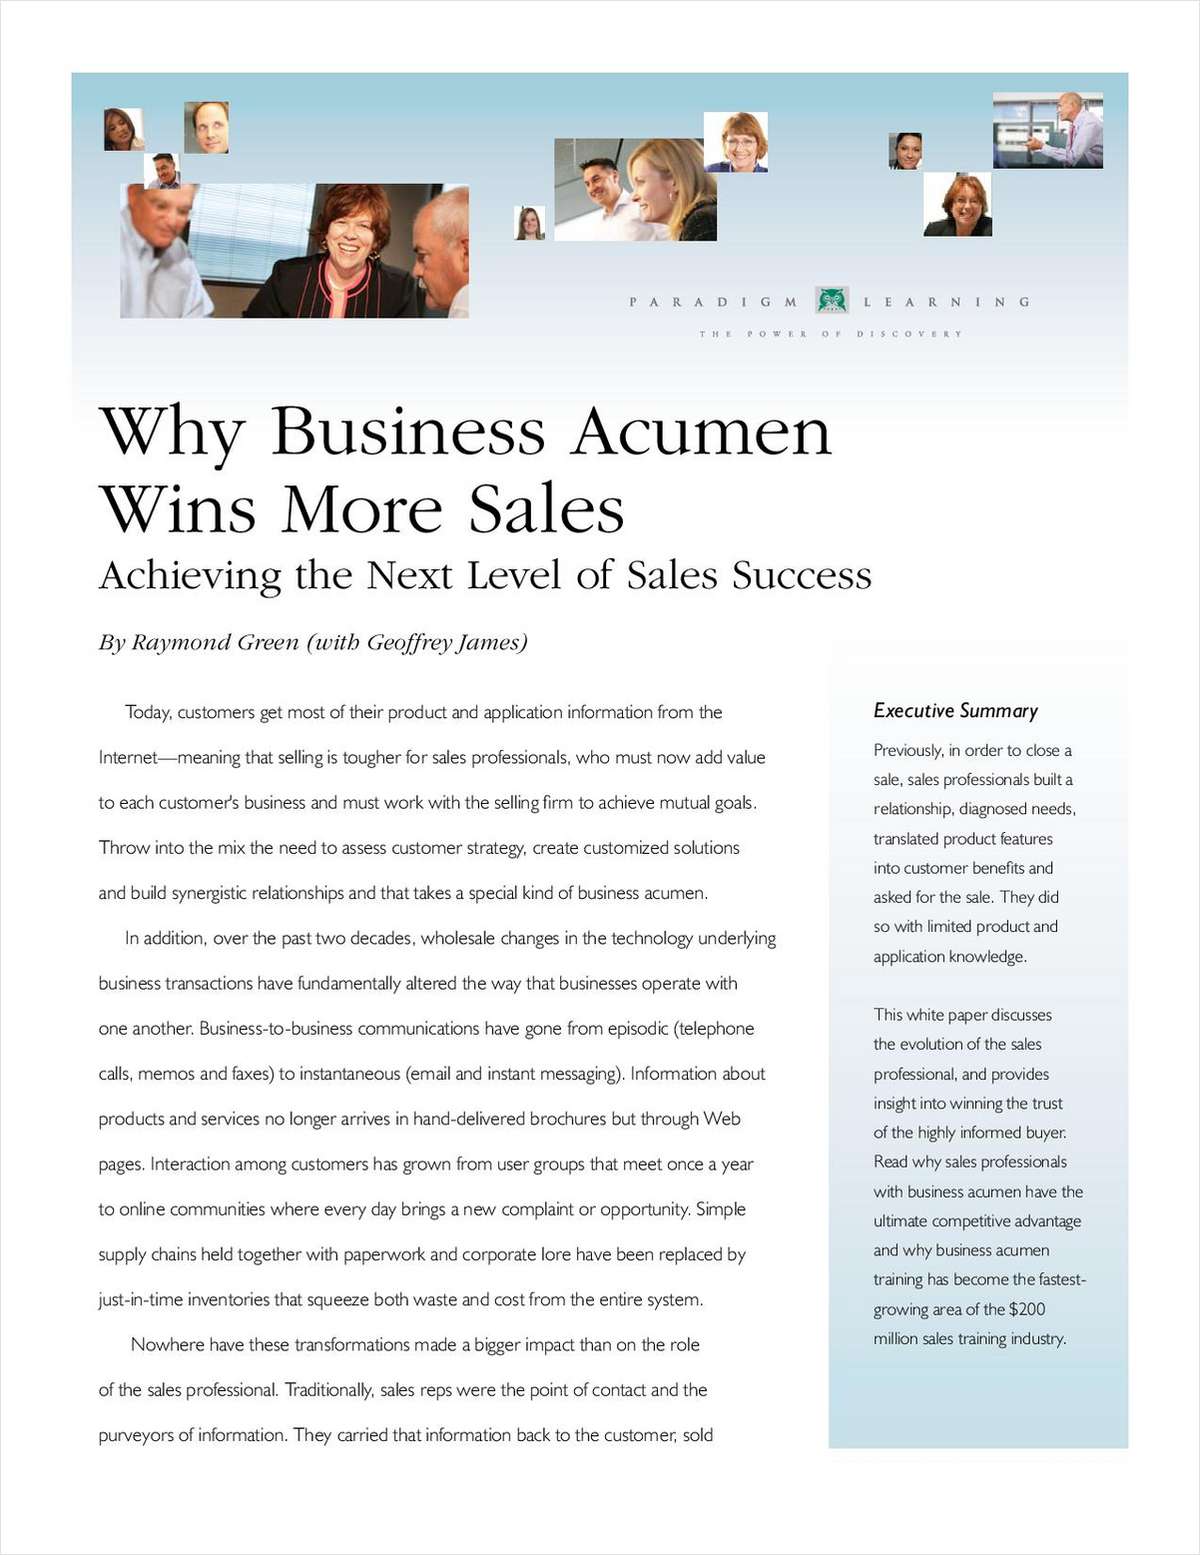 Why Business Acumen Wins More Sales